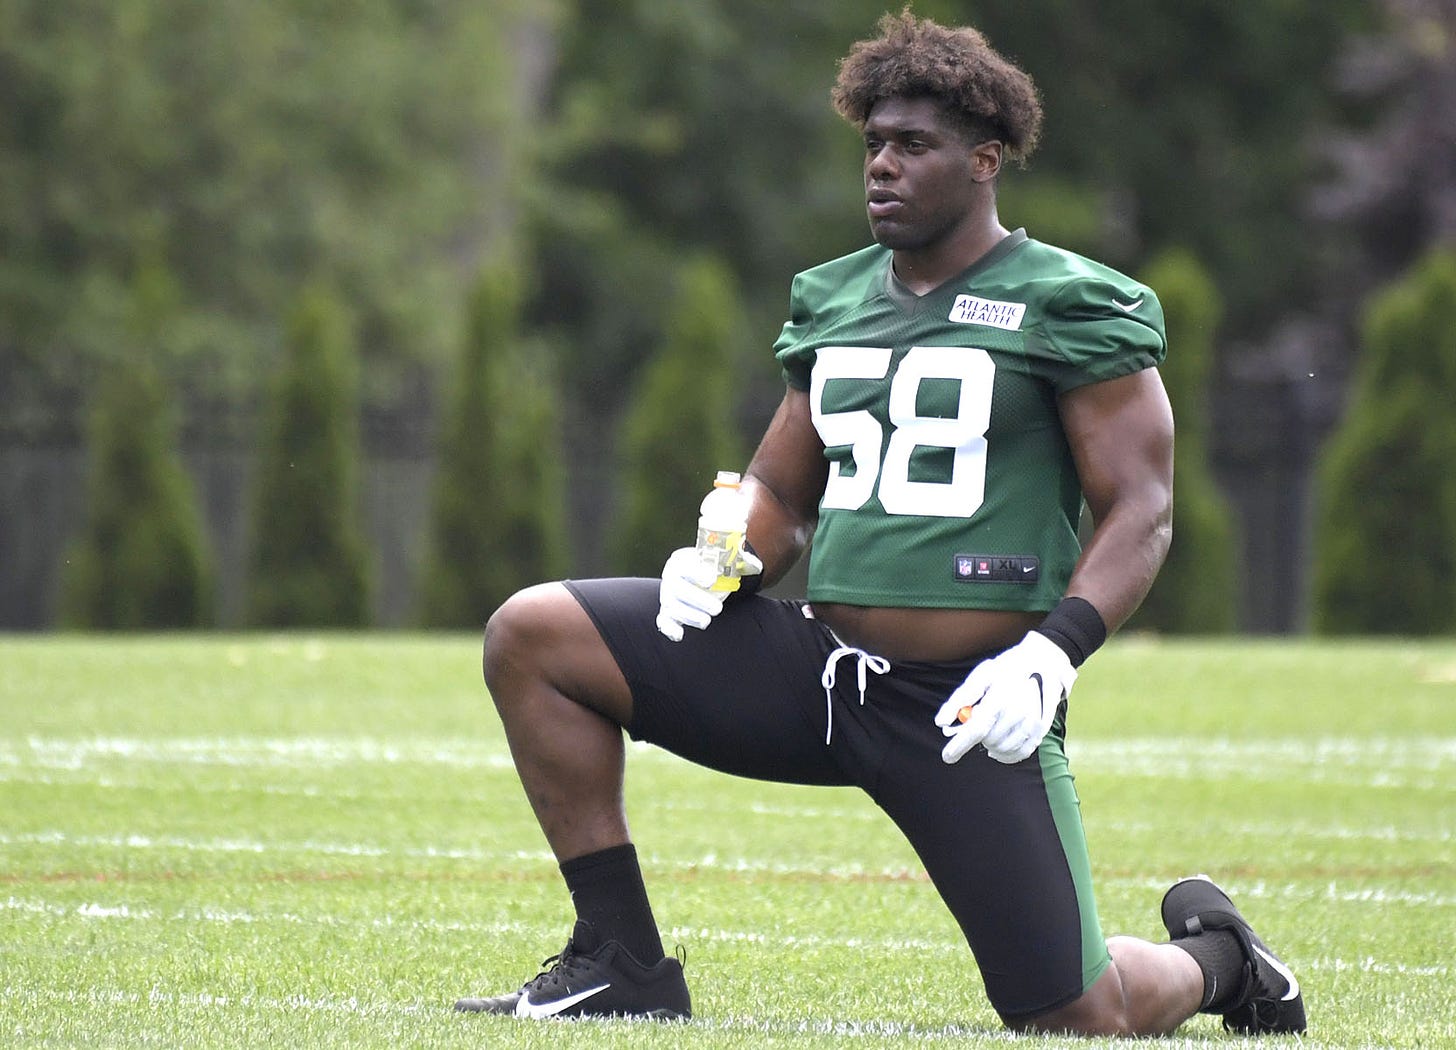 Jets' Carl Lawson wants to reach 'otherworldly' level